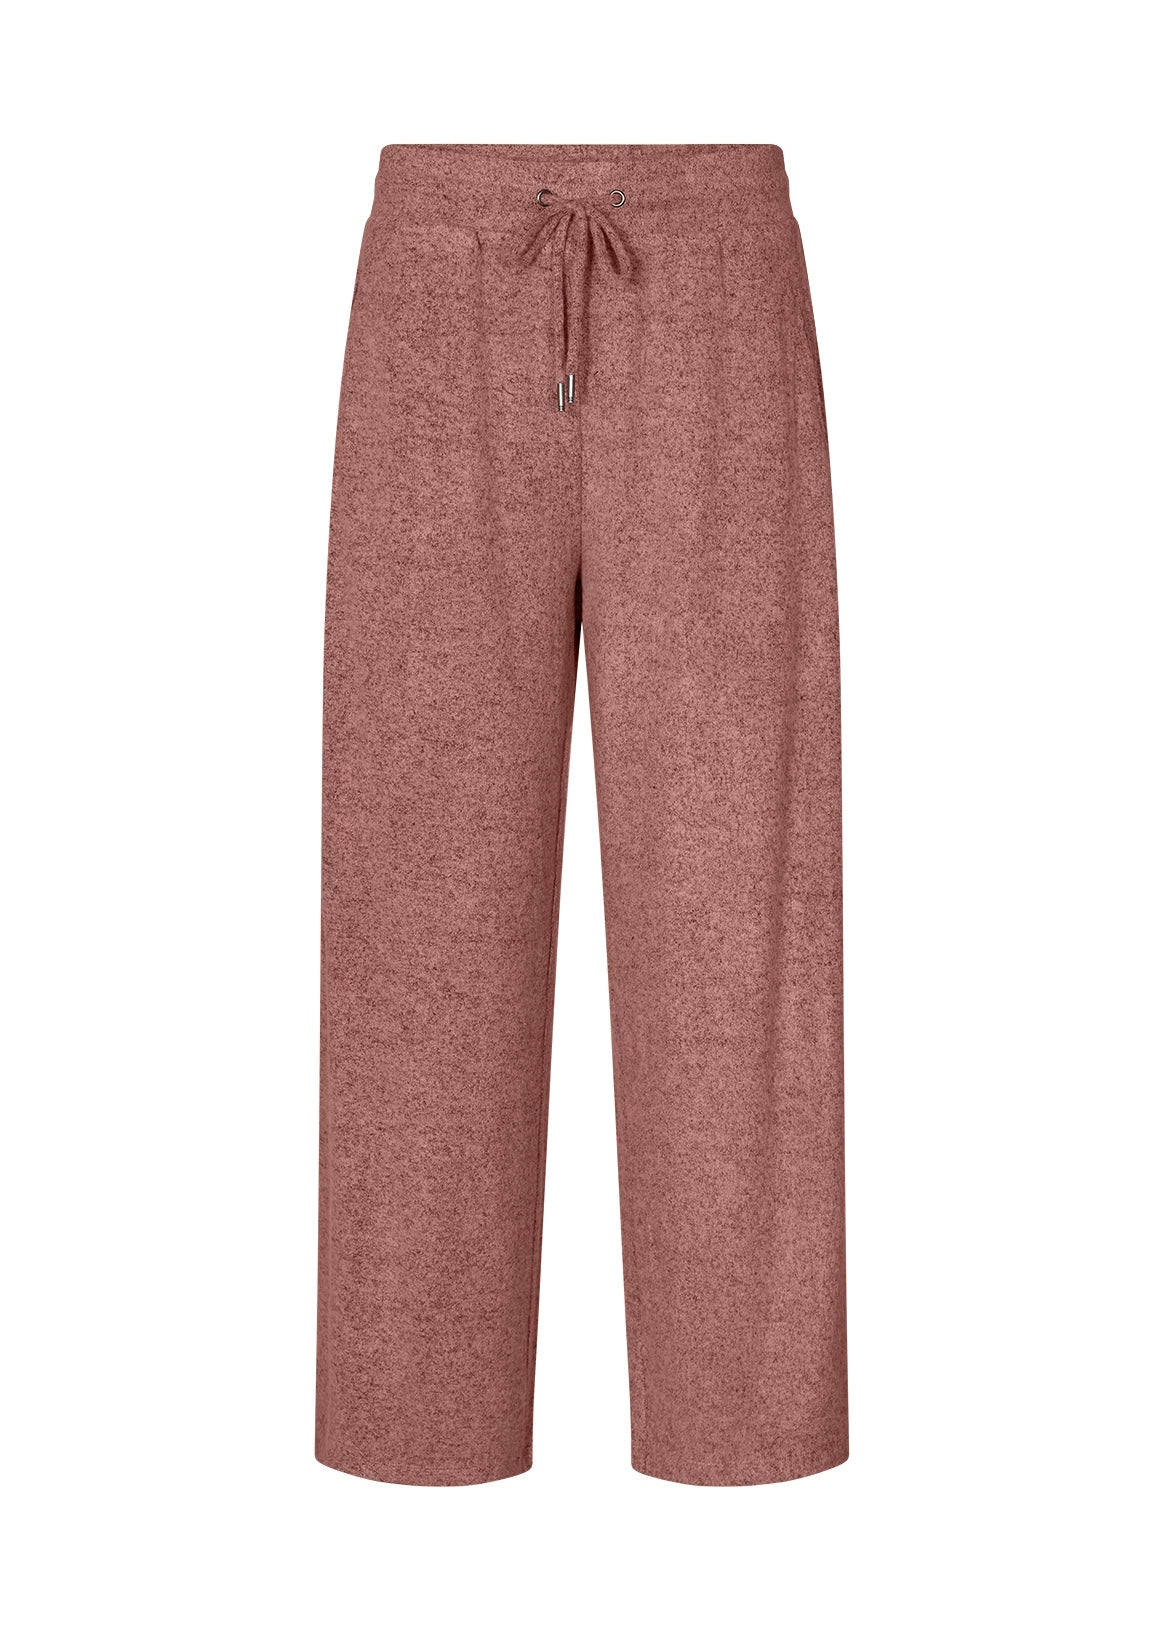 Soyaconcept - Biara Trousers SALE / Rose